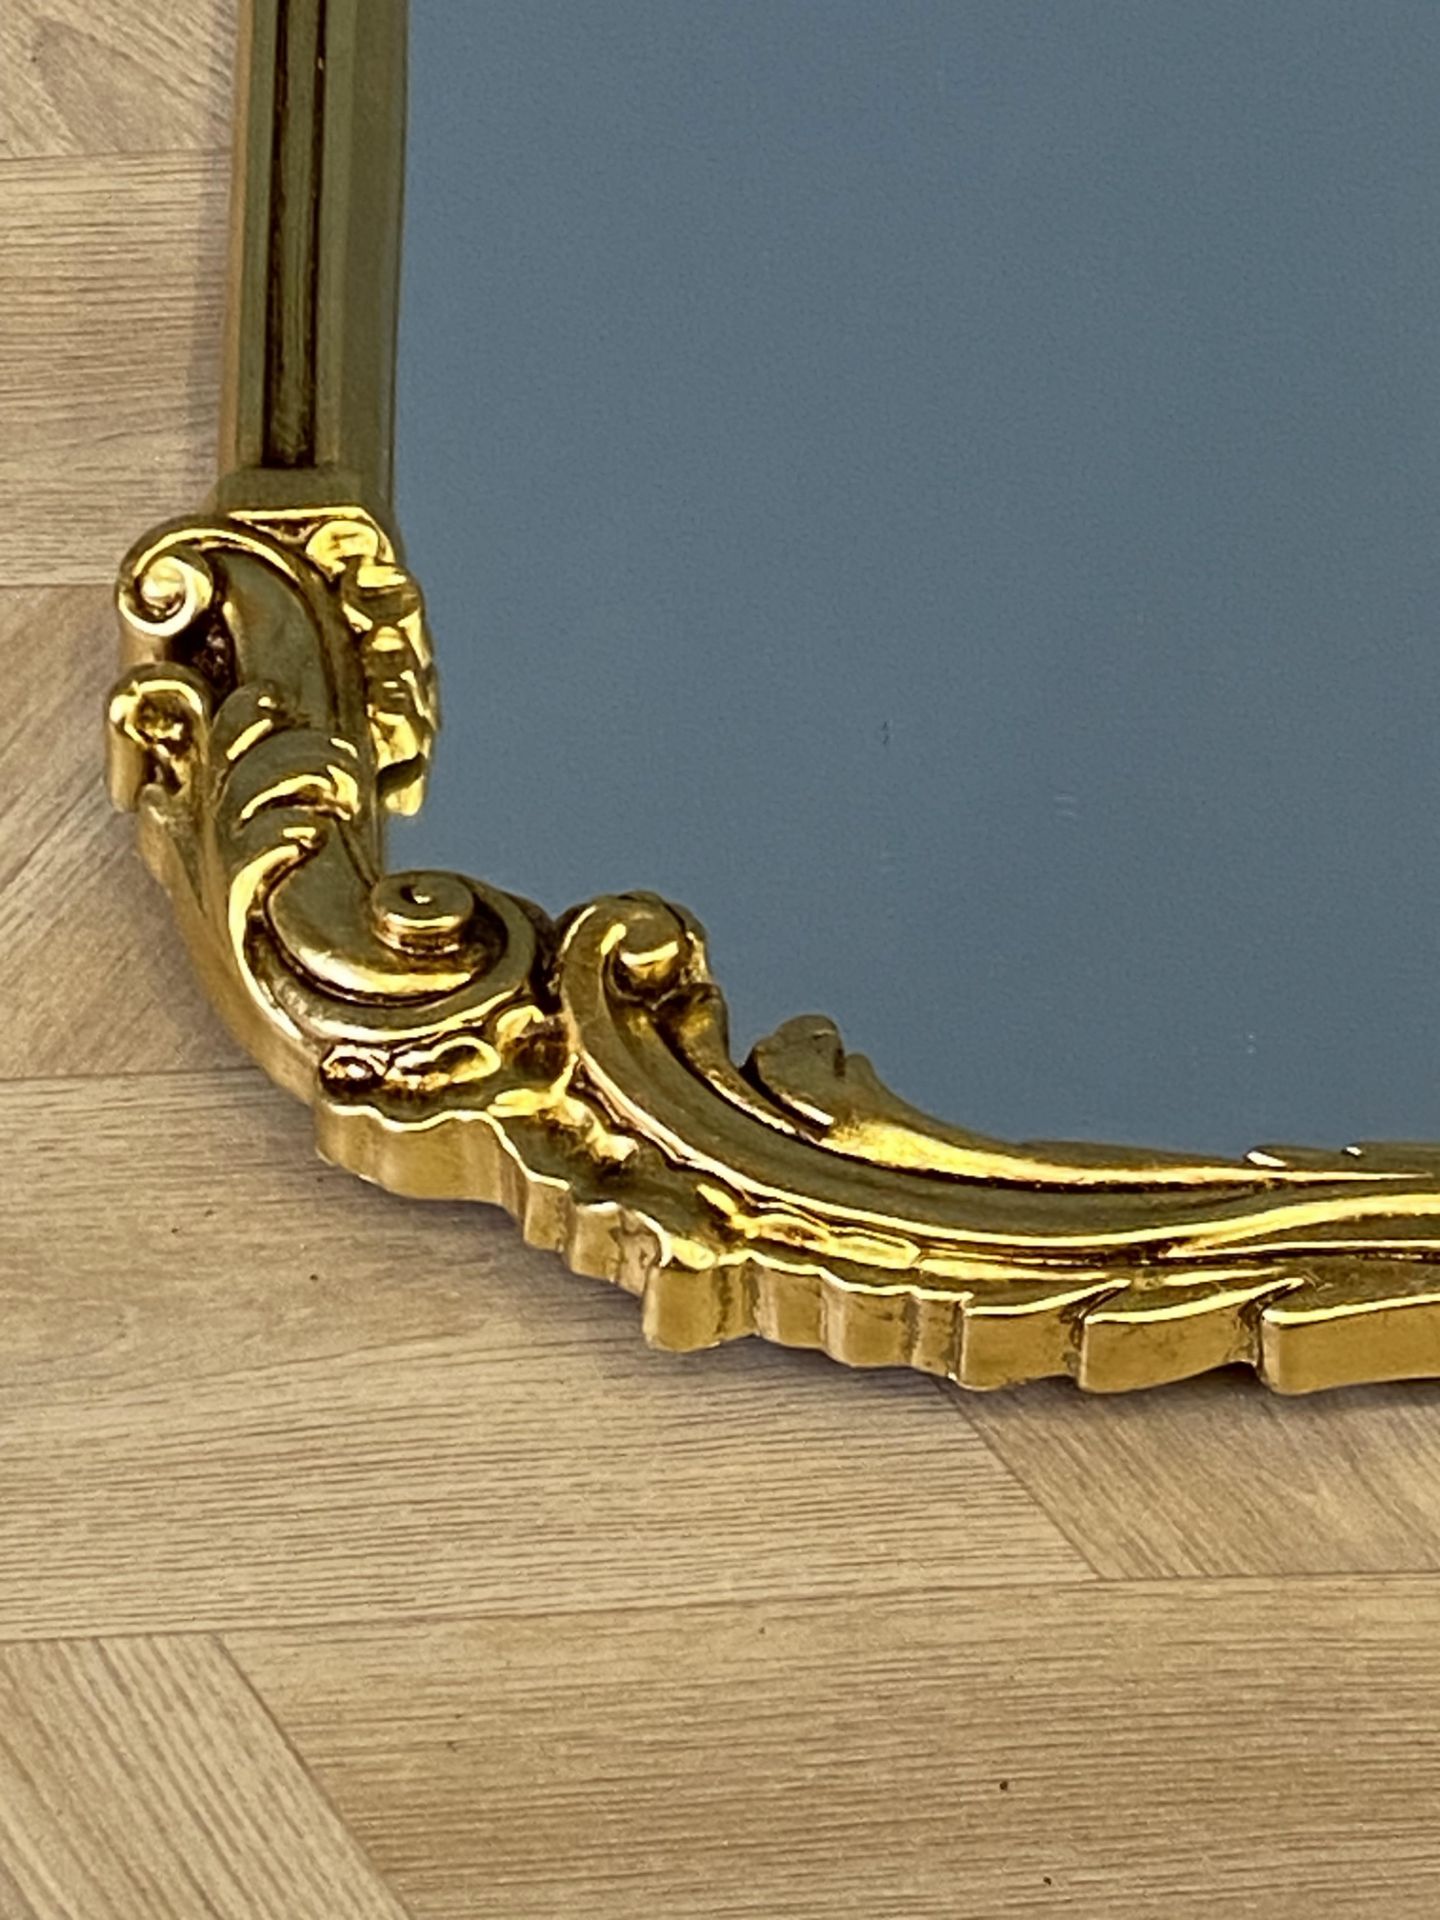 Antique style decorative wall mirror - Image 2 of 7